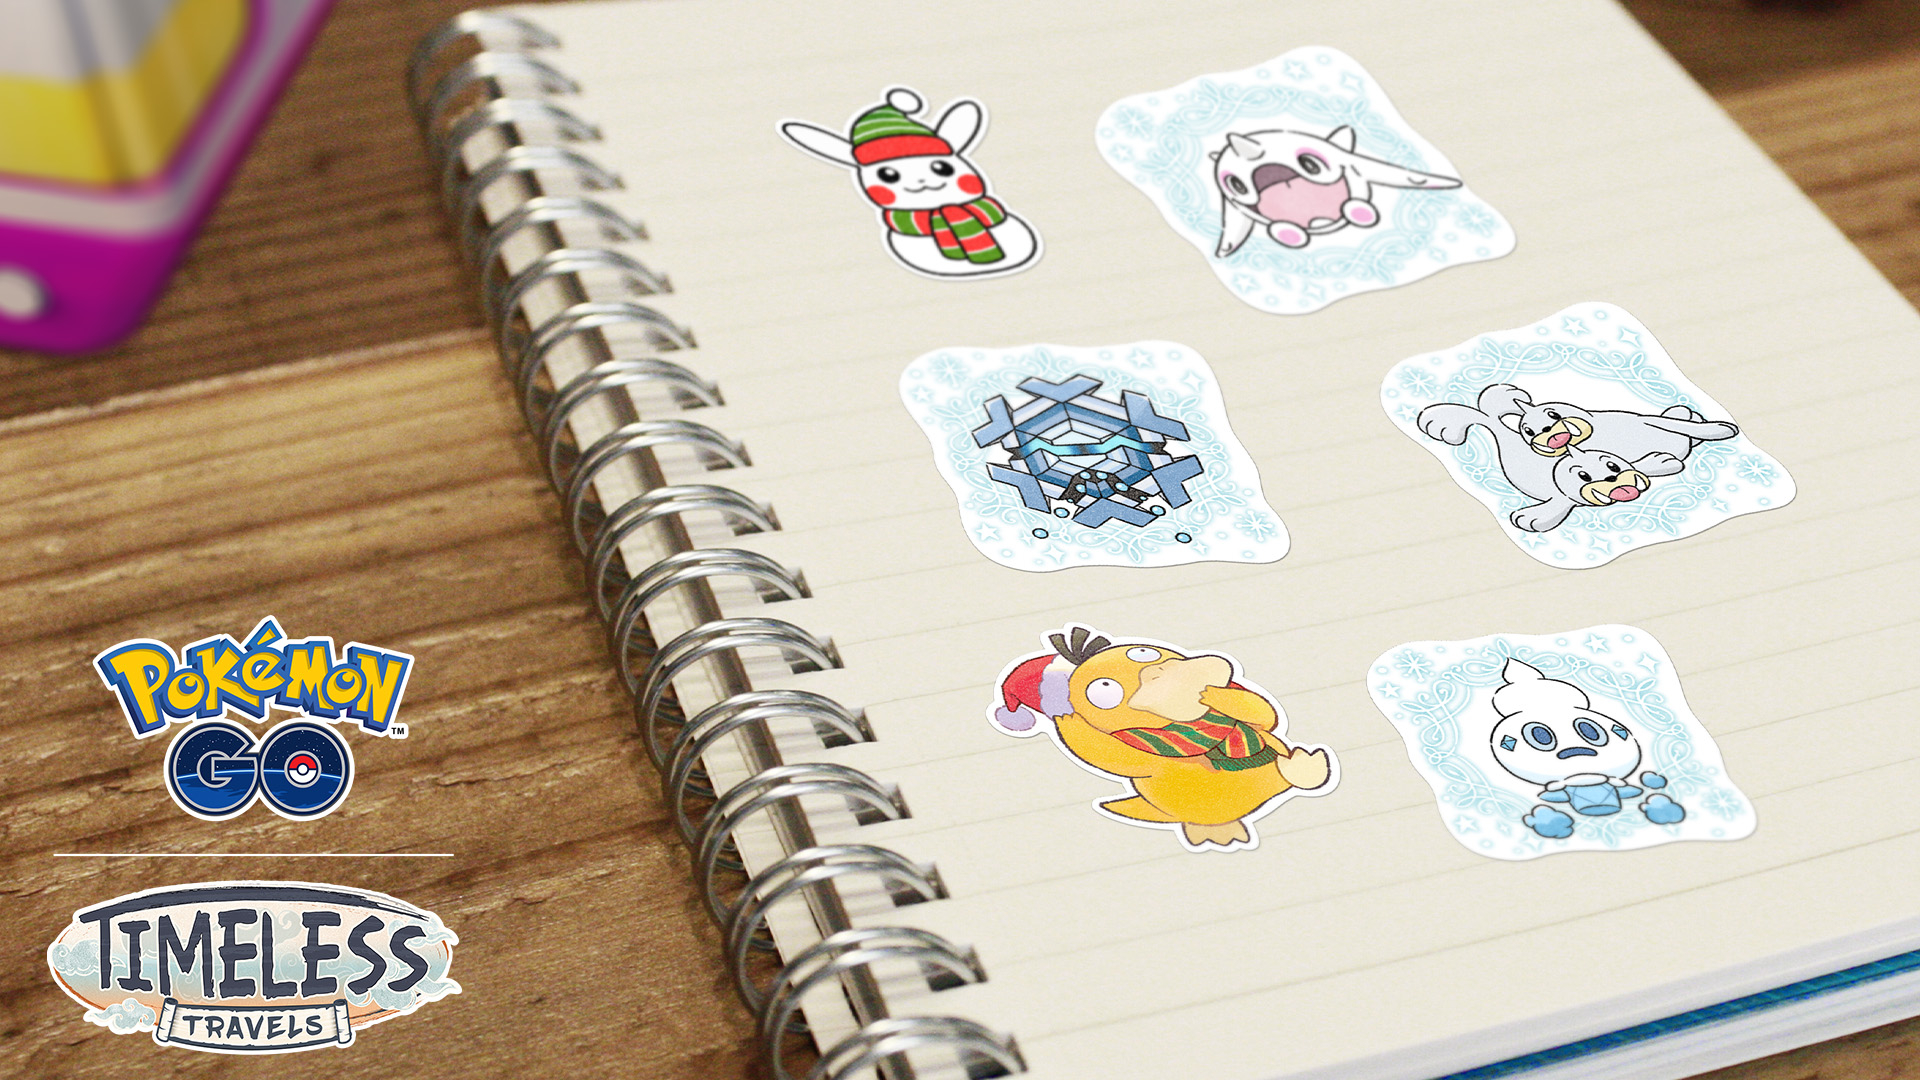 Winter Holiday event-themed stickers